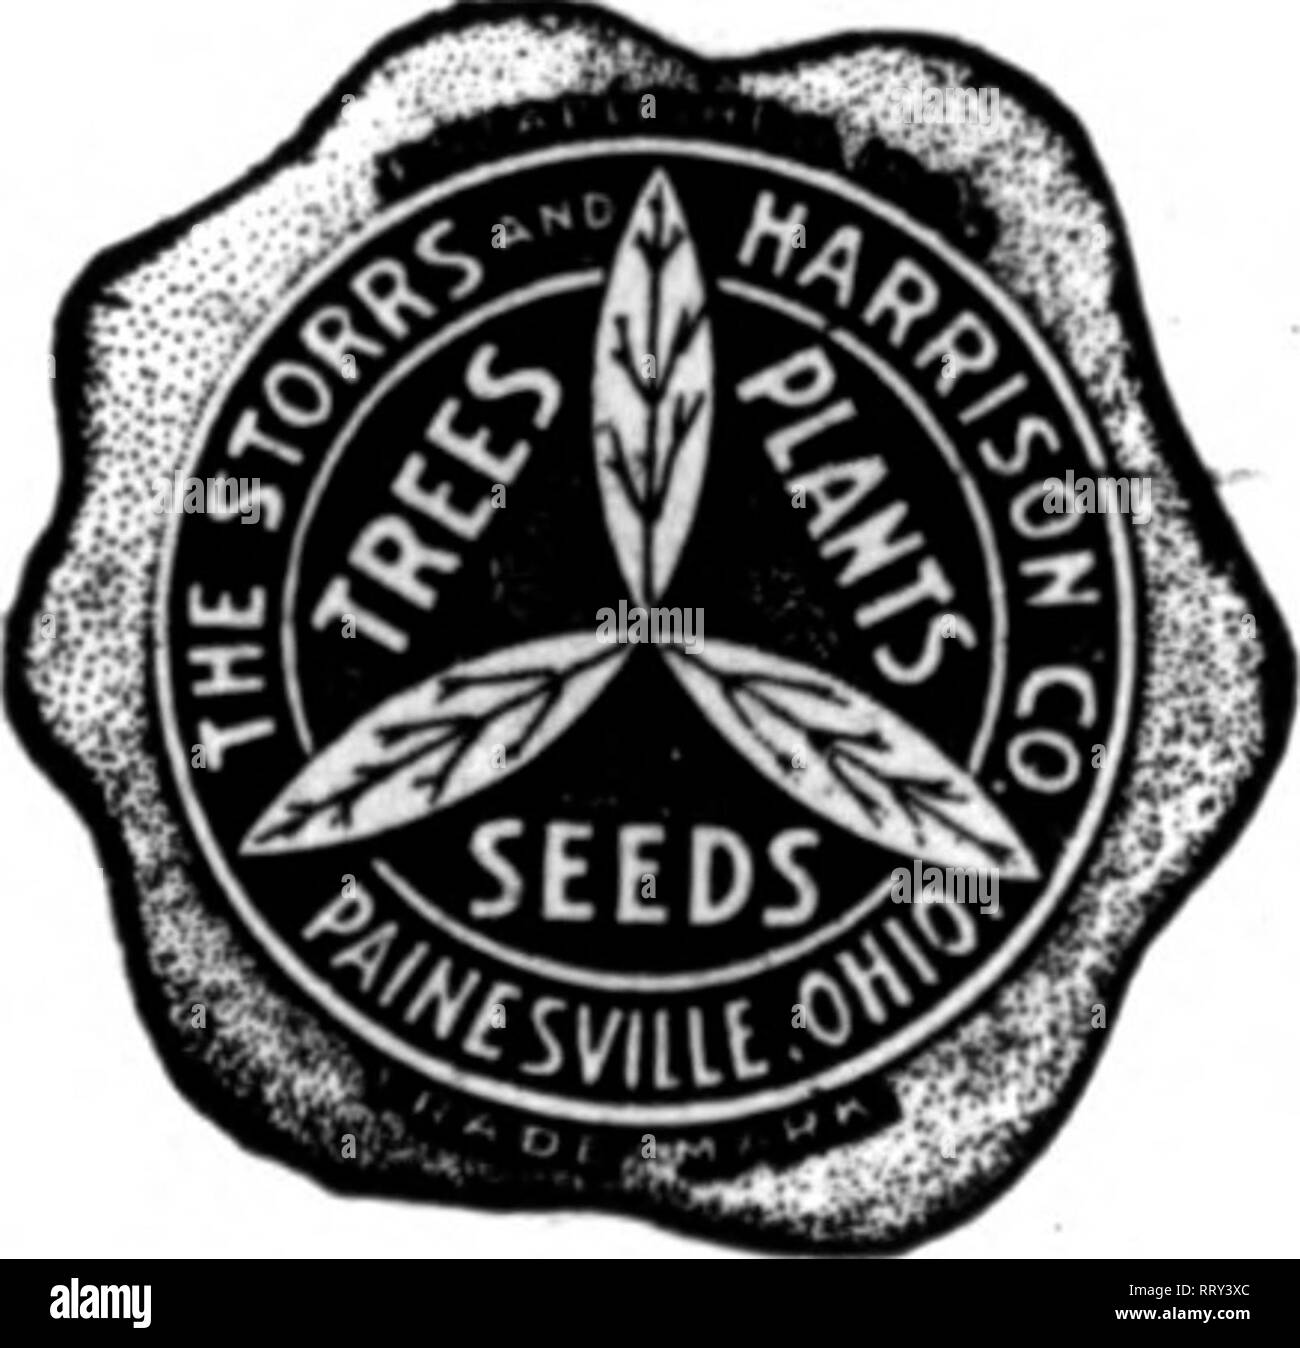 . Florists' review [microform]. Floriculture. &quot;Supeil) Quality&quot; Seeds for Florists THE STORRS &amp; HARRISON CO/S SUPERB MIXTURE OF Giant Pansy Seed is tlie very best that Pansy SpecialiatB can produce. Carefully mixed and blended. Positively no better seed can be had at any price. Trade Pkt, SOc; ^-«., $1.2S; n., $4.00 All other strains and named varietief* of Pansiea. See our &quot;Trade List&quot; for prices. 'SUPERB QUALITY,&quot; Mixed Colors, Trade packet, $1.00 CINERARIA BELLIS PERENNIS (English Daisy) Lon^ellow (red), Snowball (white), tr. pkt., 35c; Mixed Colors, tr. pkt., 2 Stock Photo